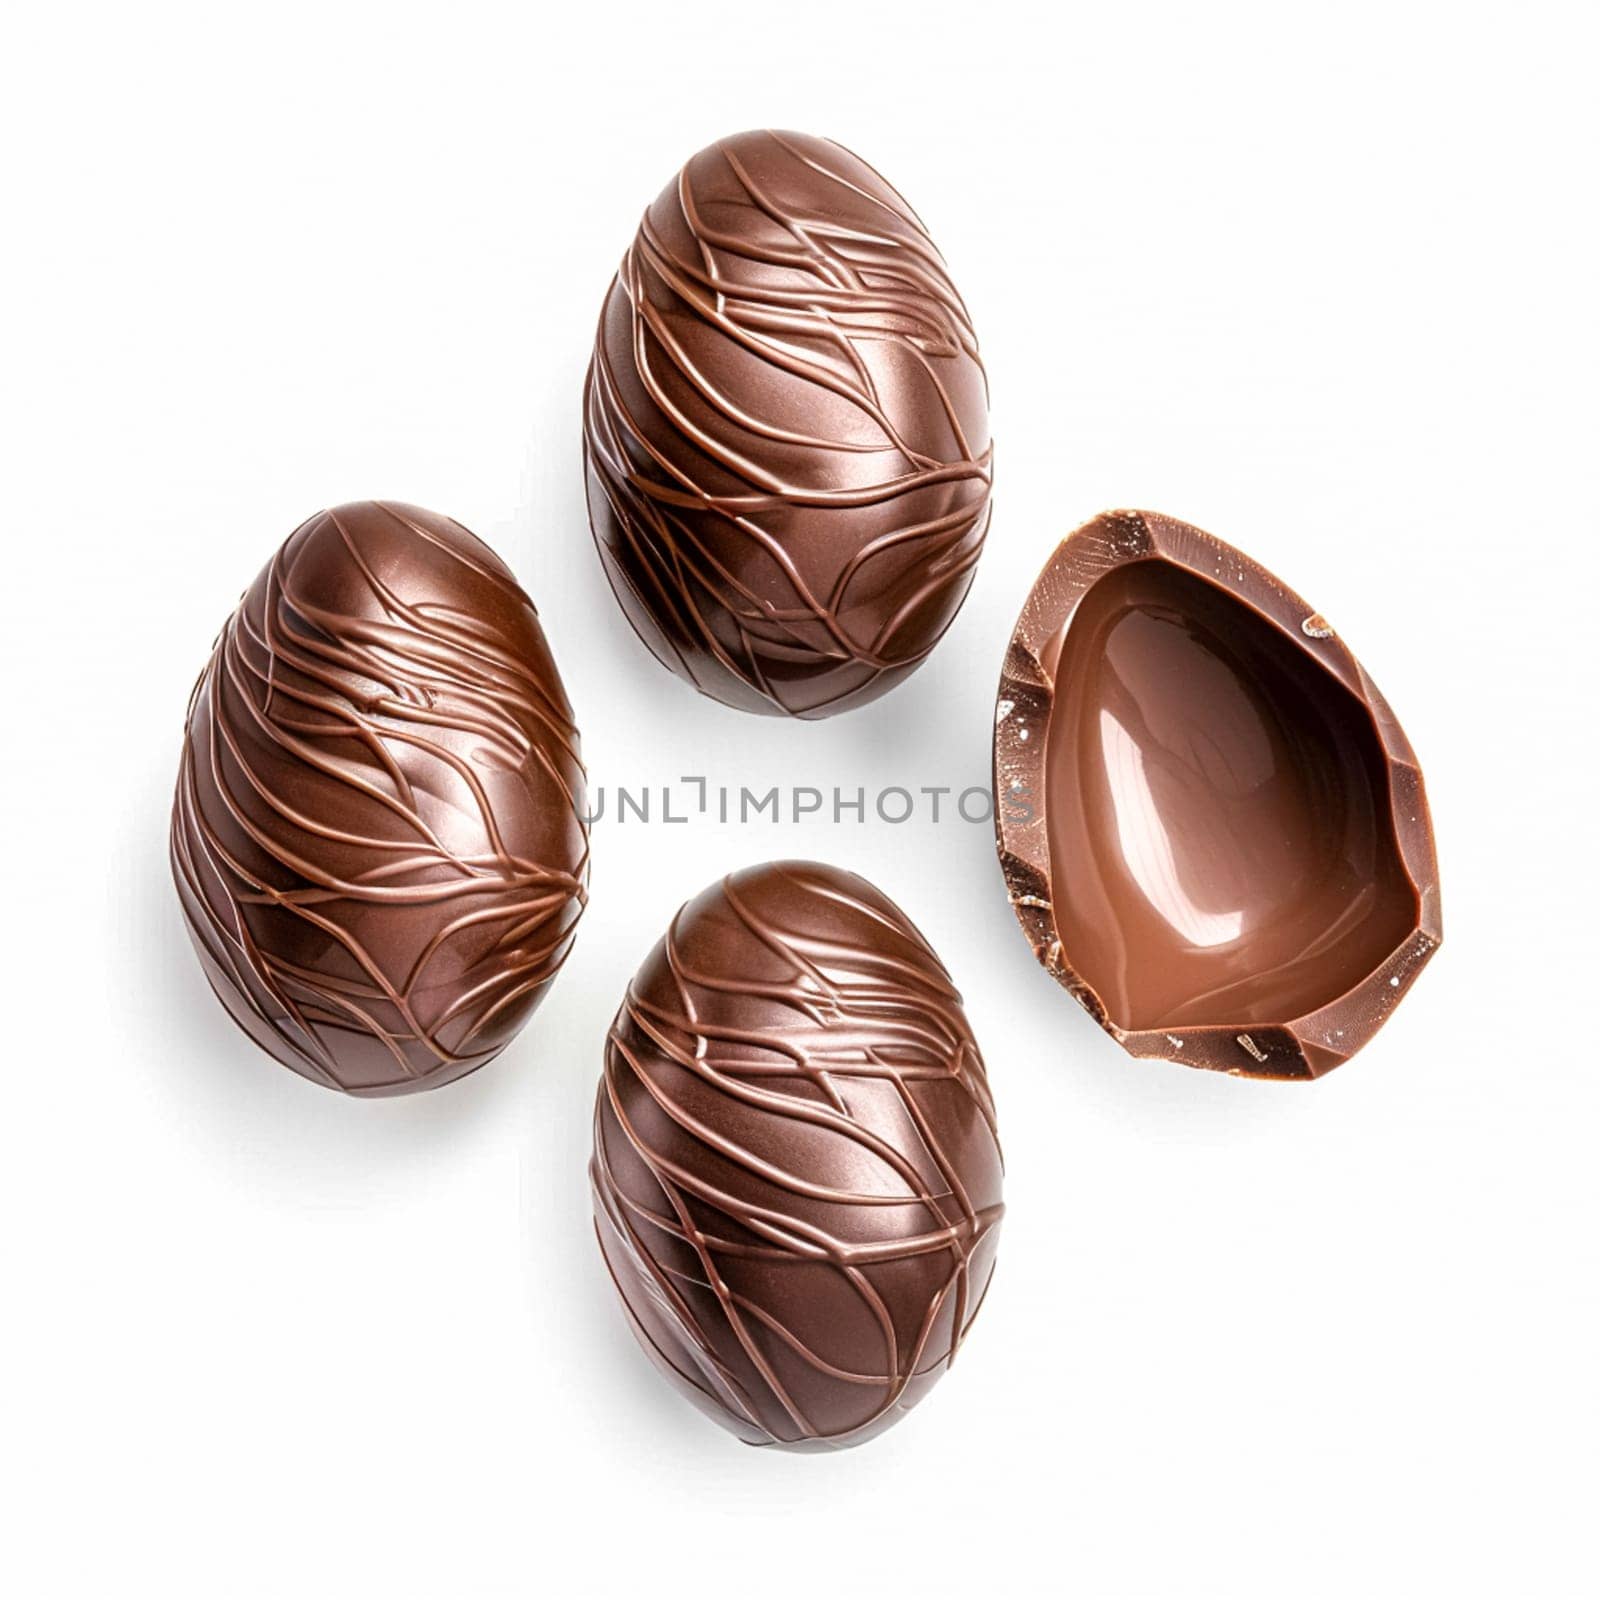 Chocolate Easter egg isolated on white background, sweet holiday present and gift